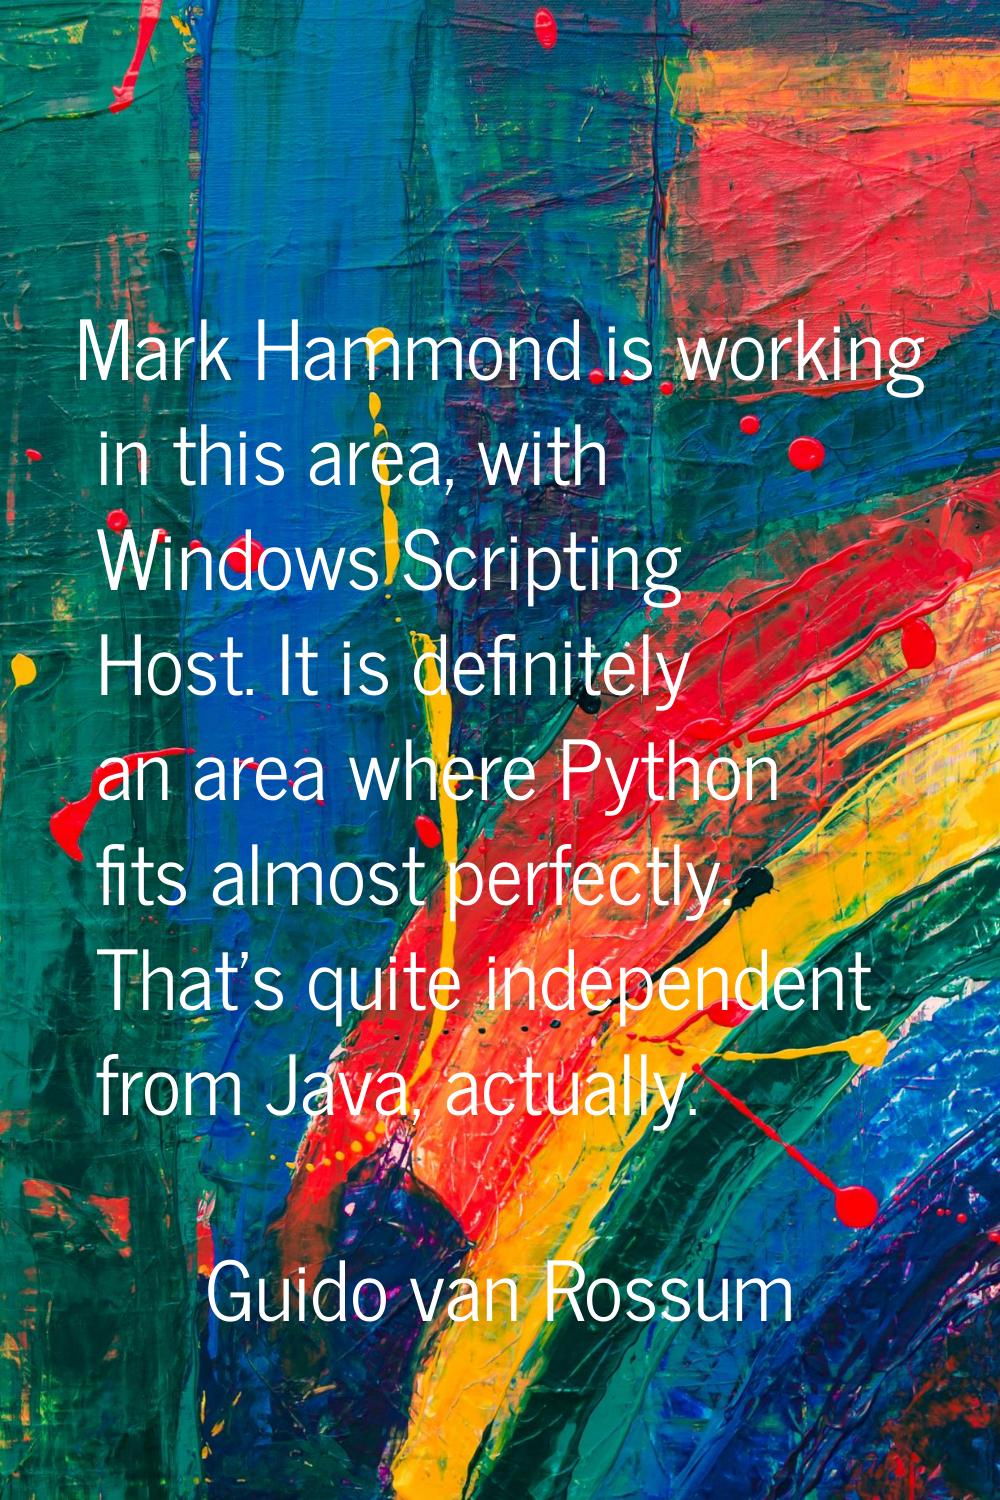 Mark Hammond is working in this area, with Windows Scripting Host. It is definitely an area where P